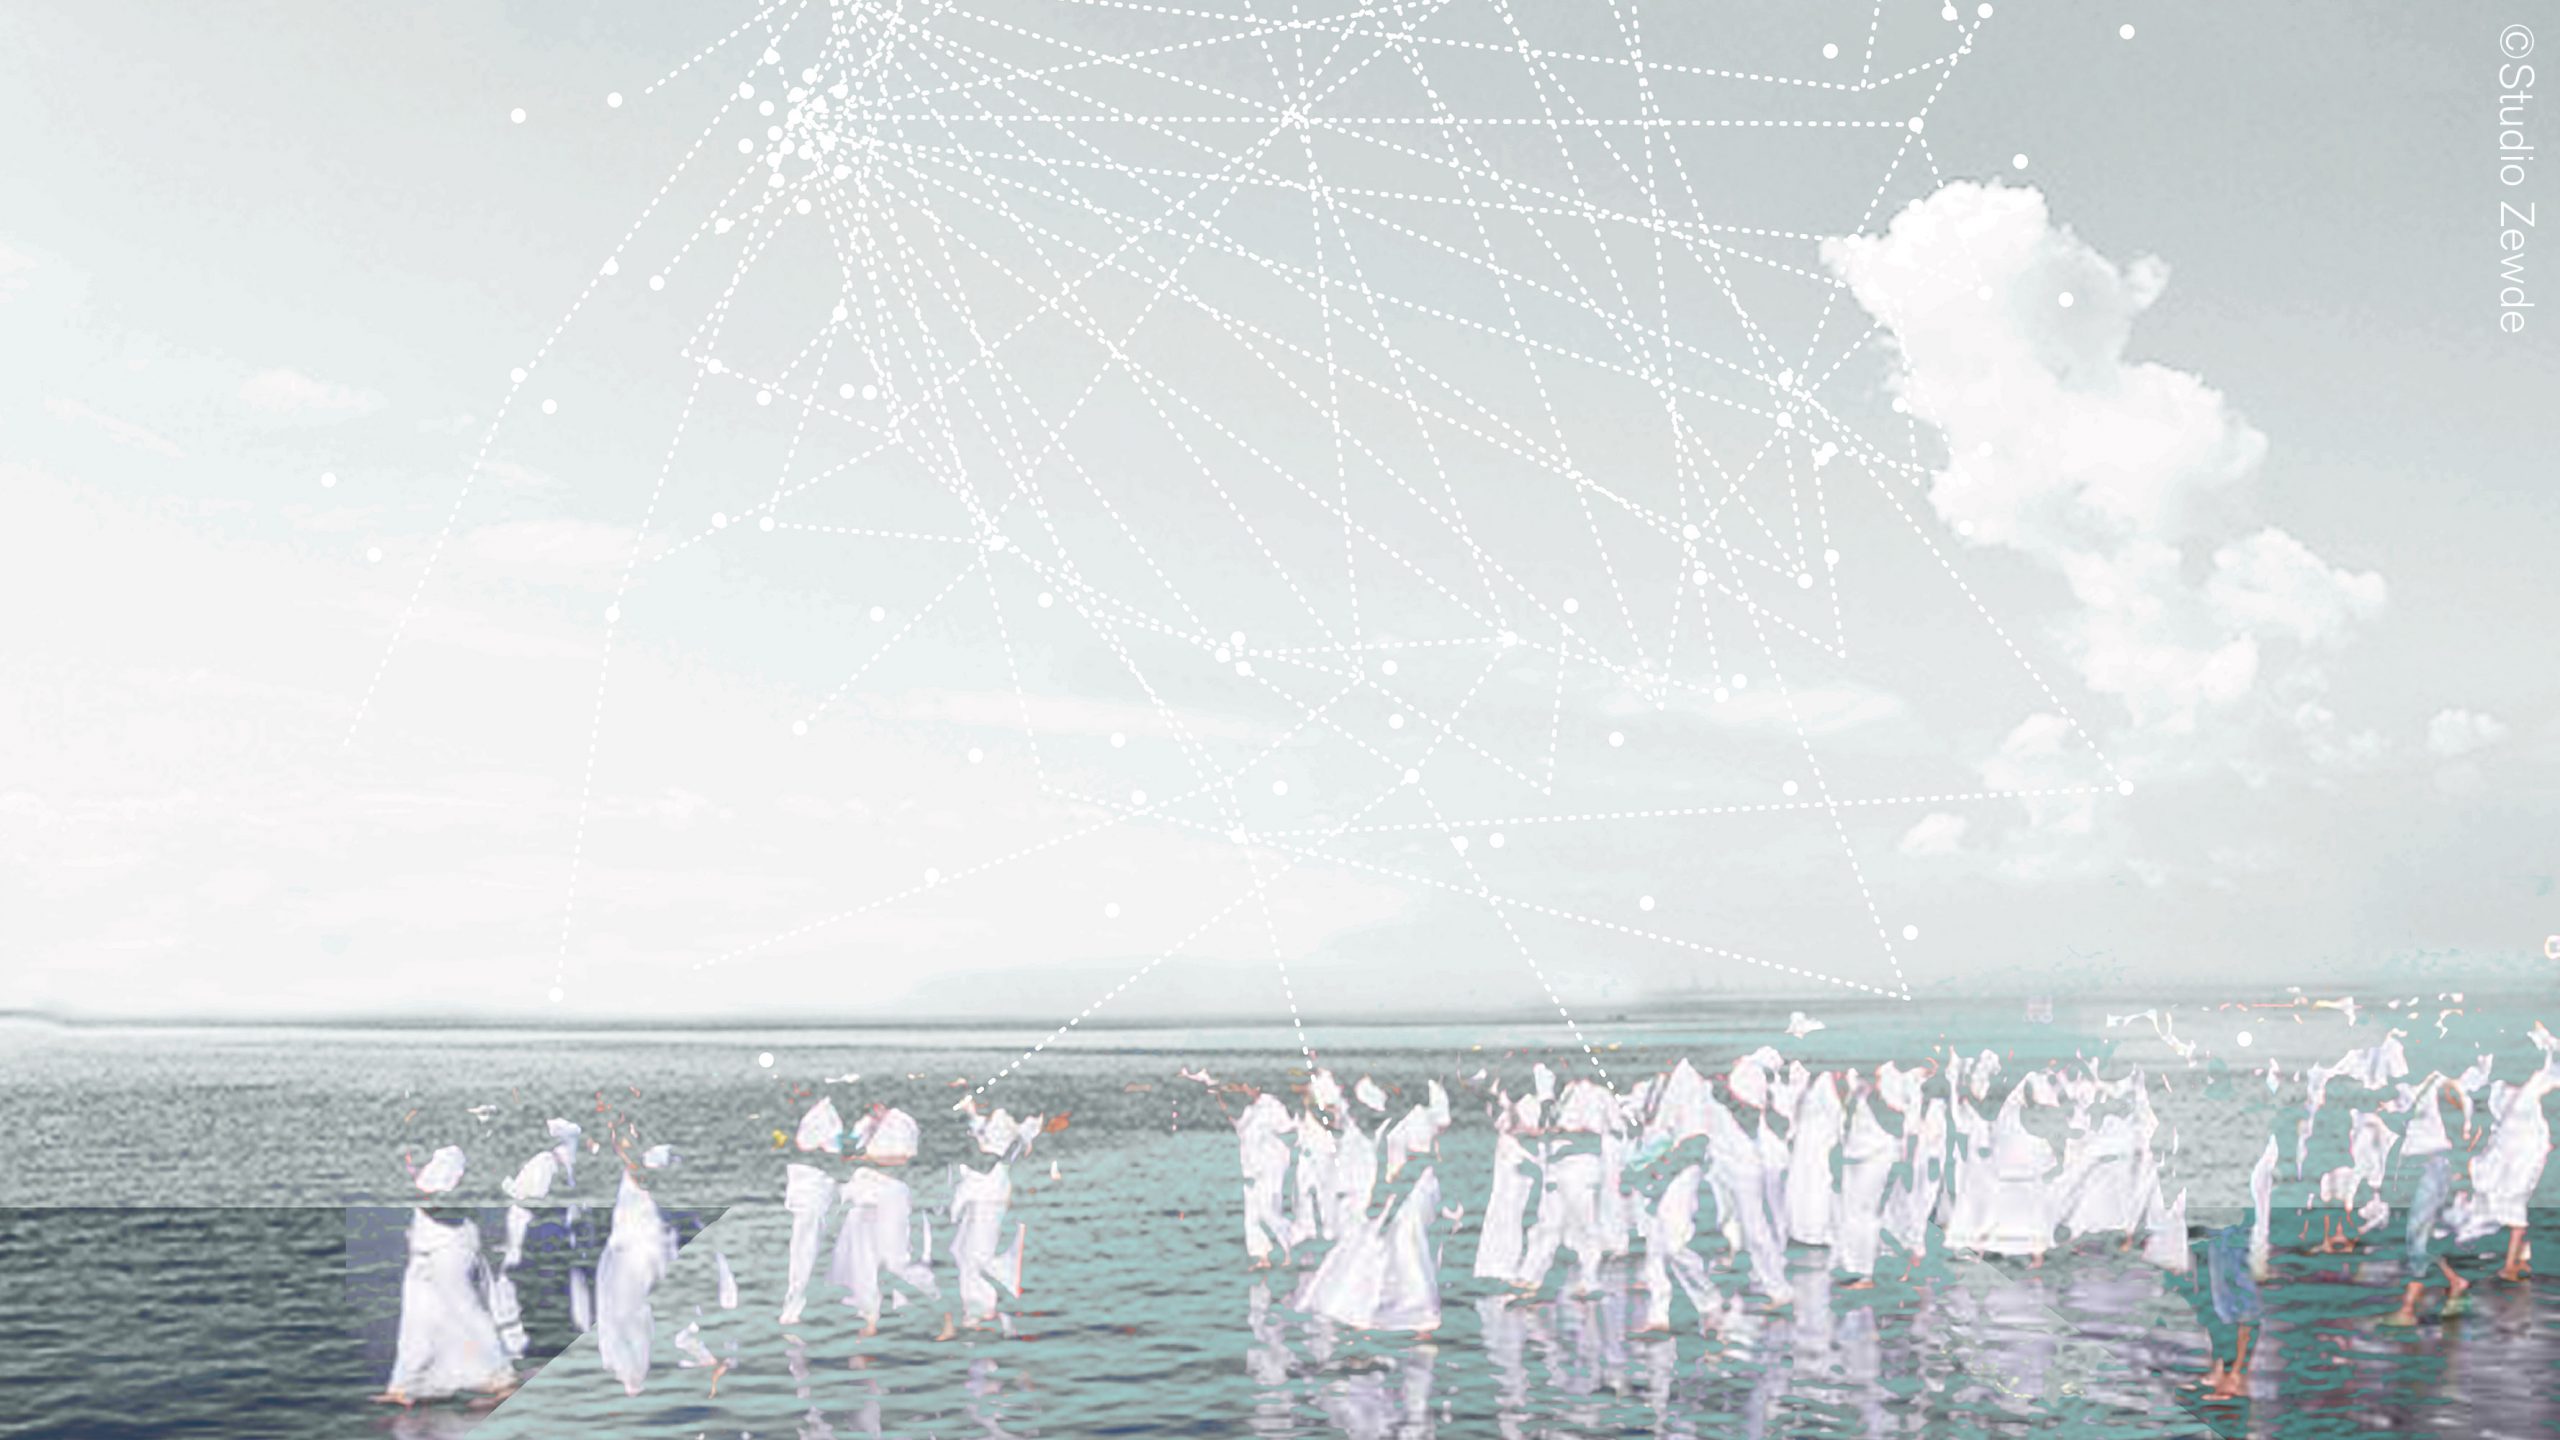 A photo of a clear oceanic scene has been overlaid with geometric points and the outline of a crowd of people walking across the water's surface